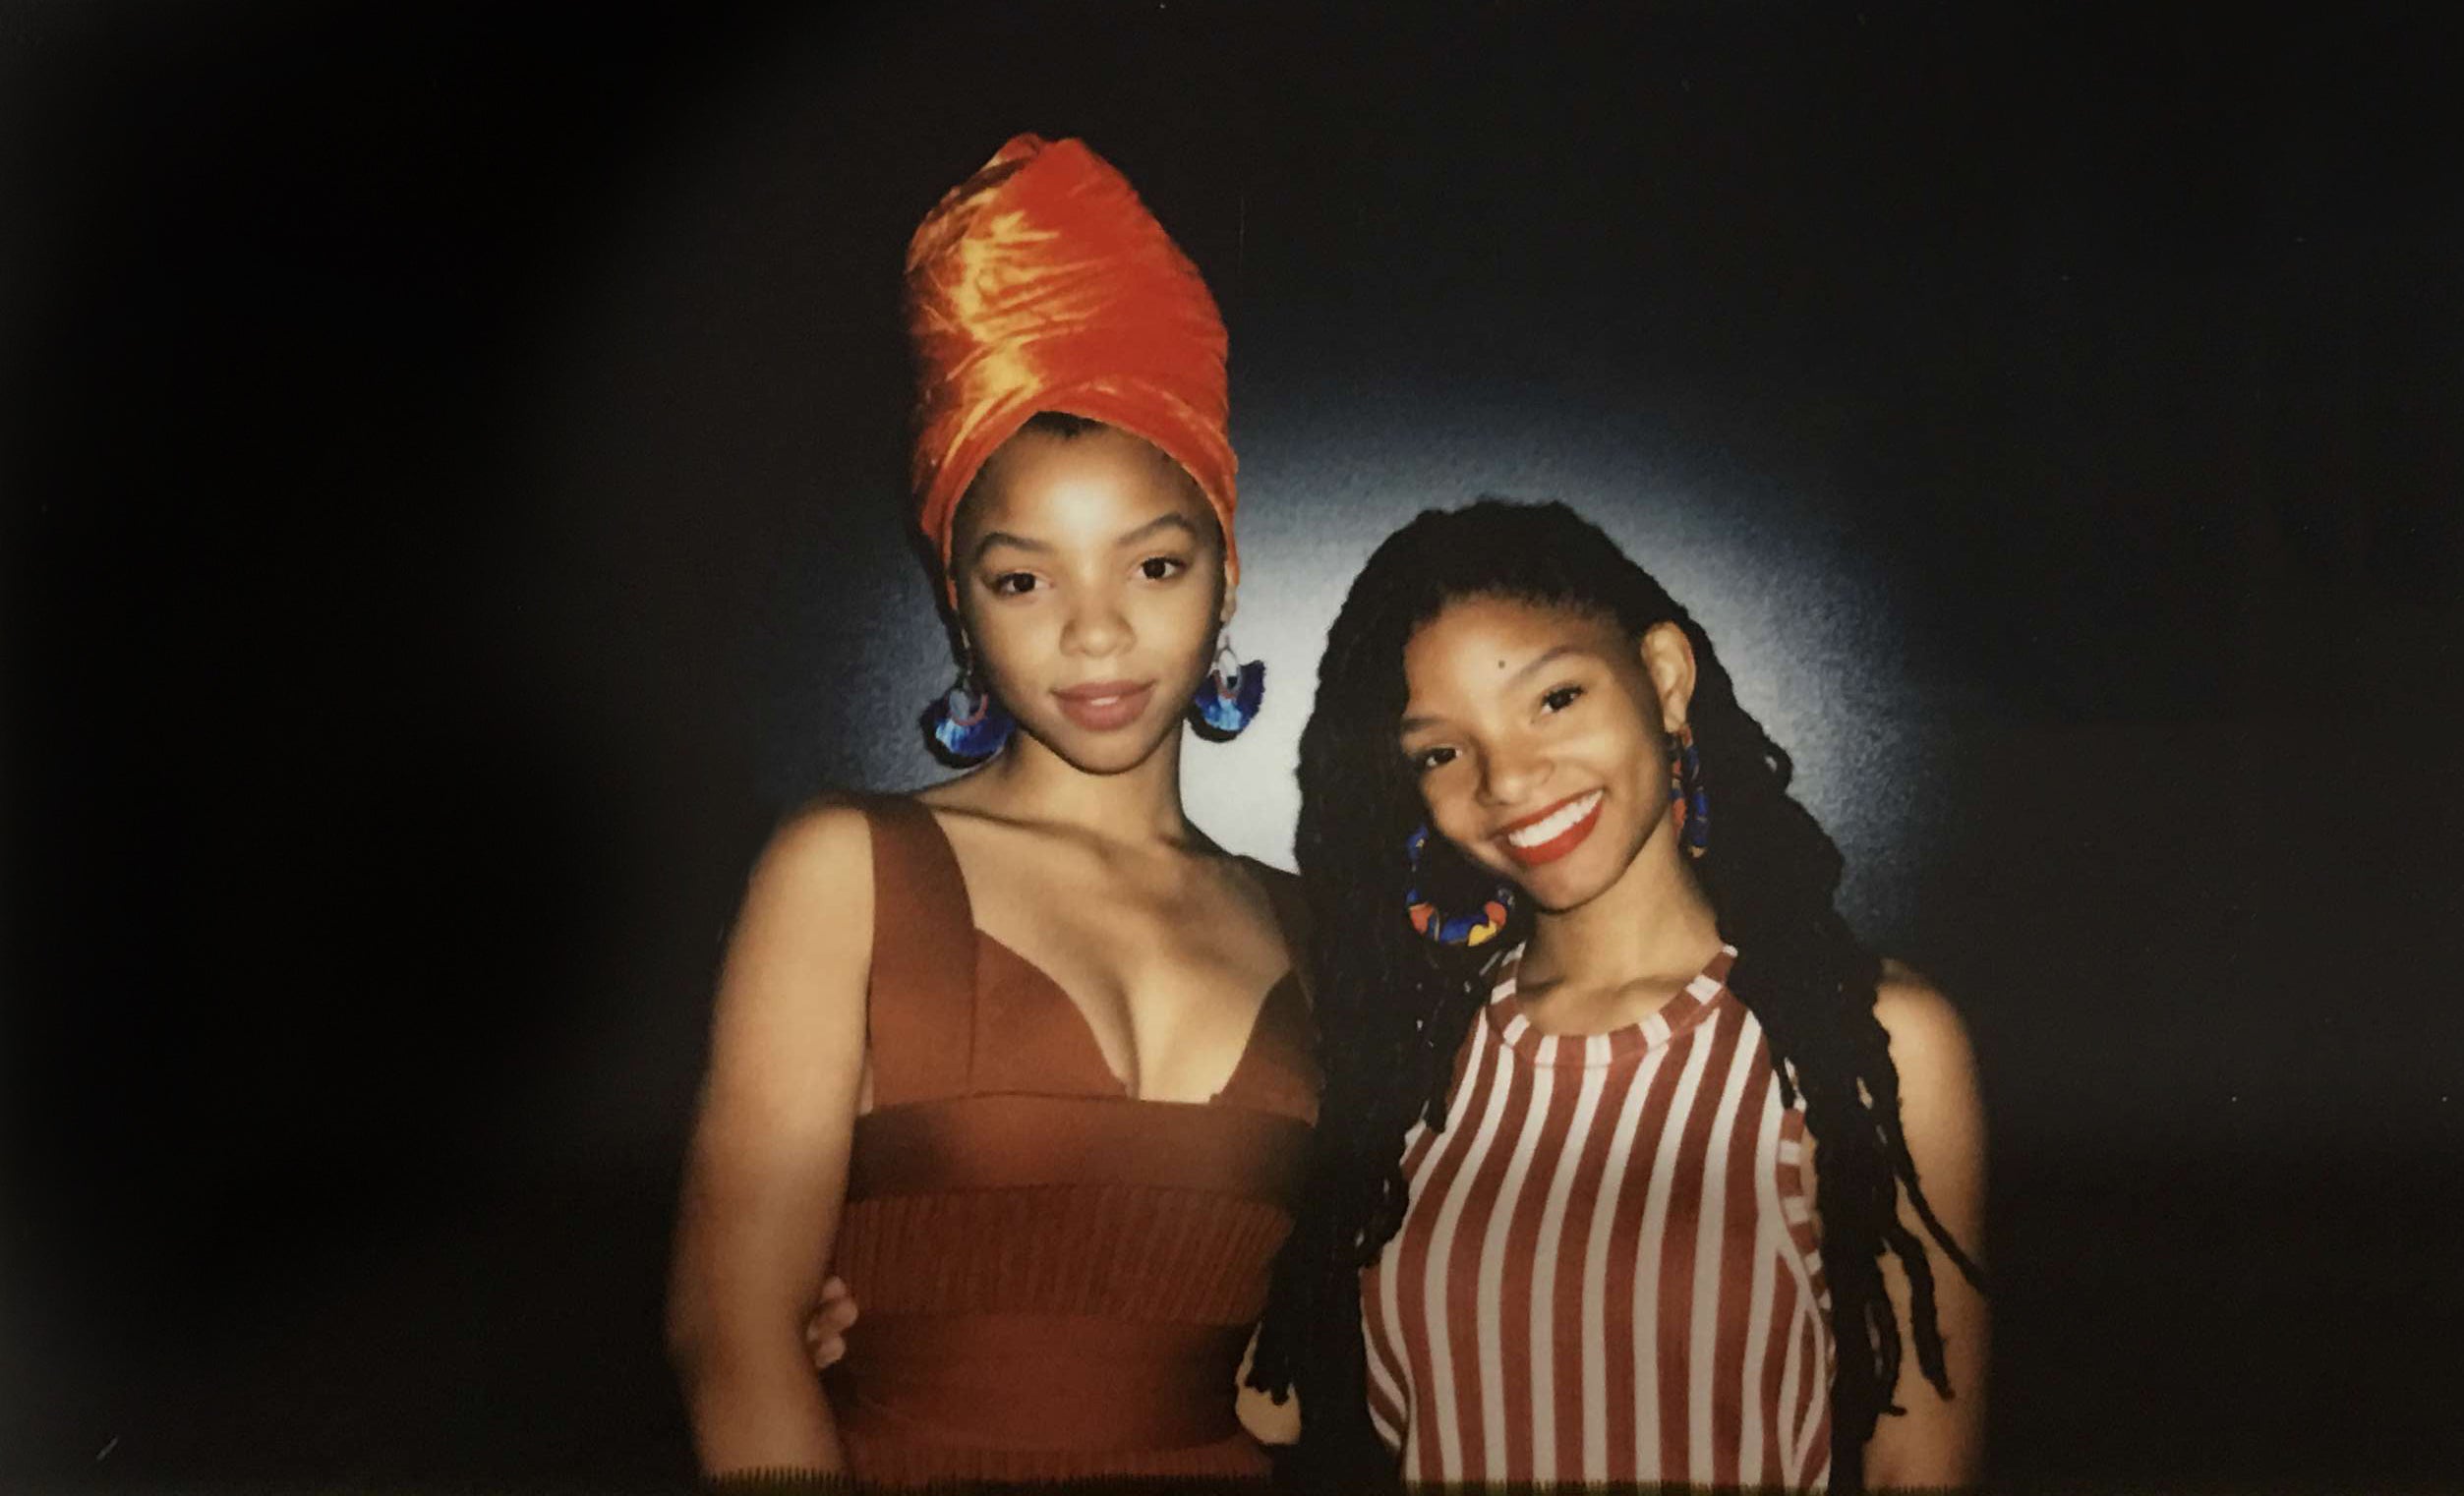 Chloe & Halle Are Headwrap Goals At ESSENCE Fest 2017
